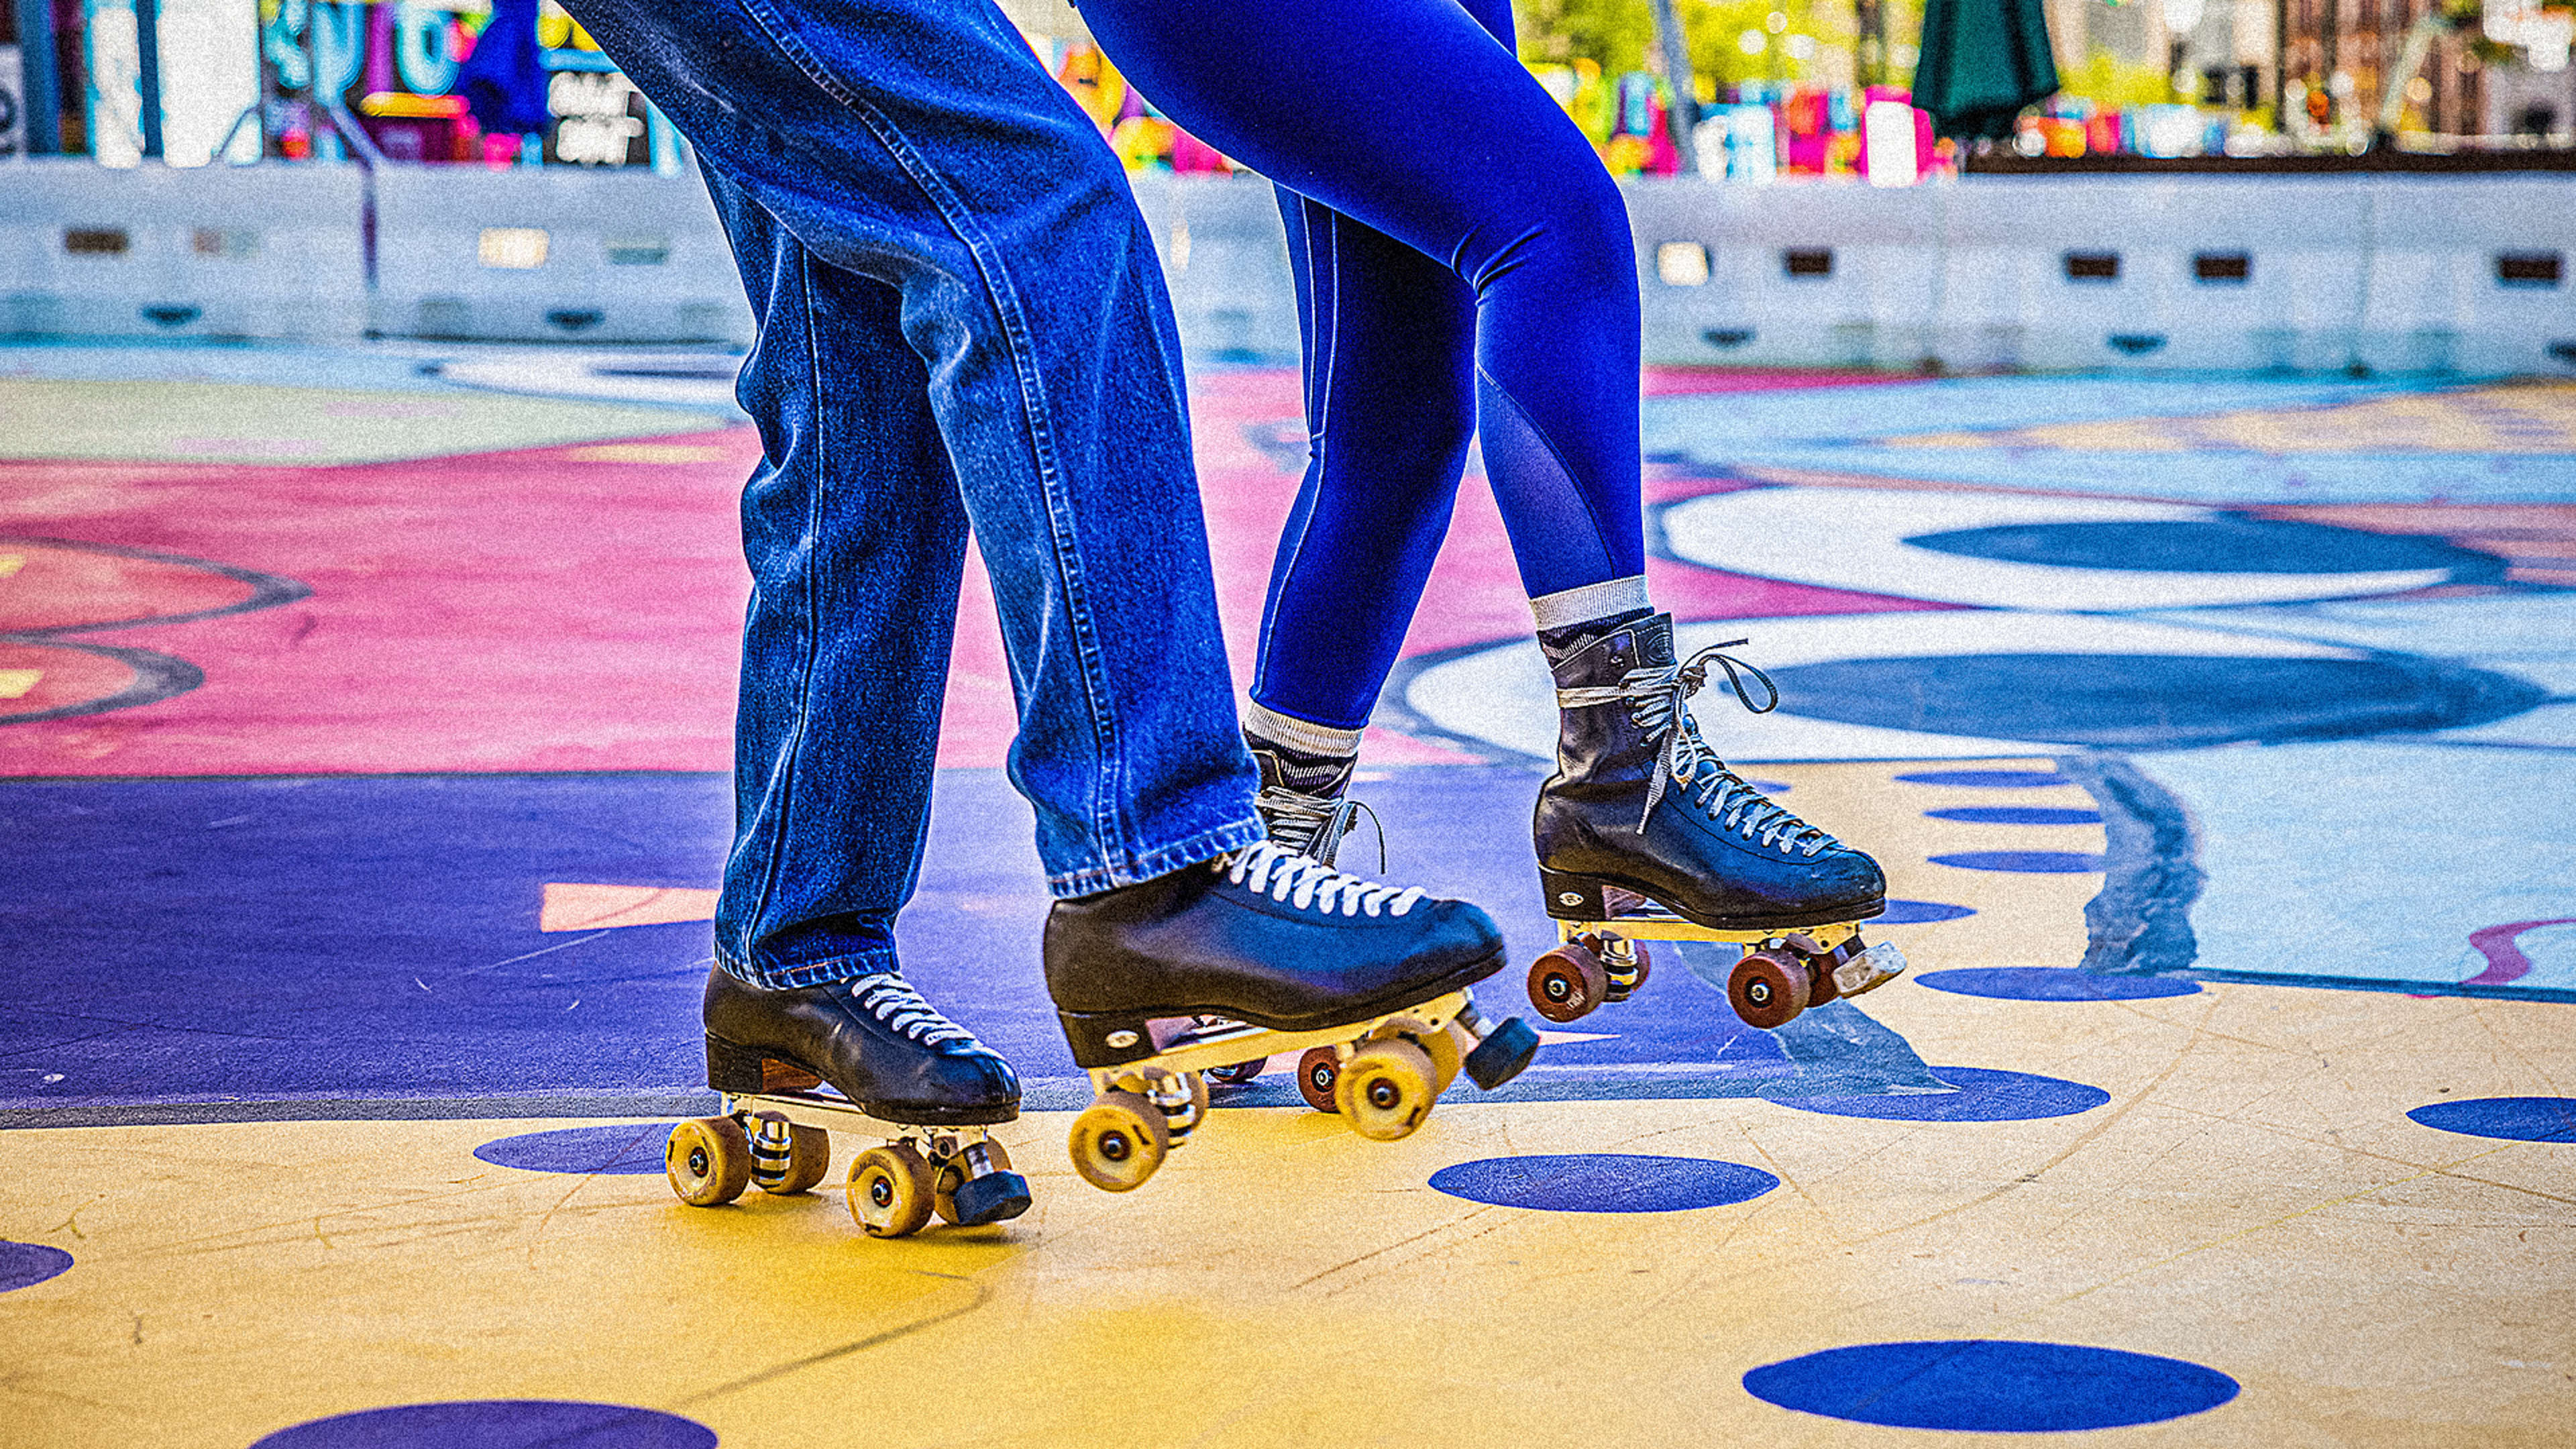 The roller rink is making a comeback